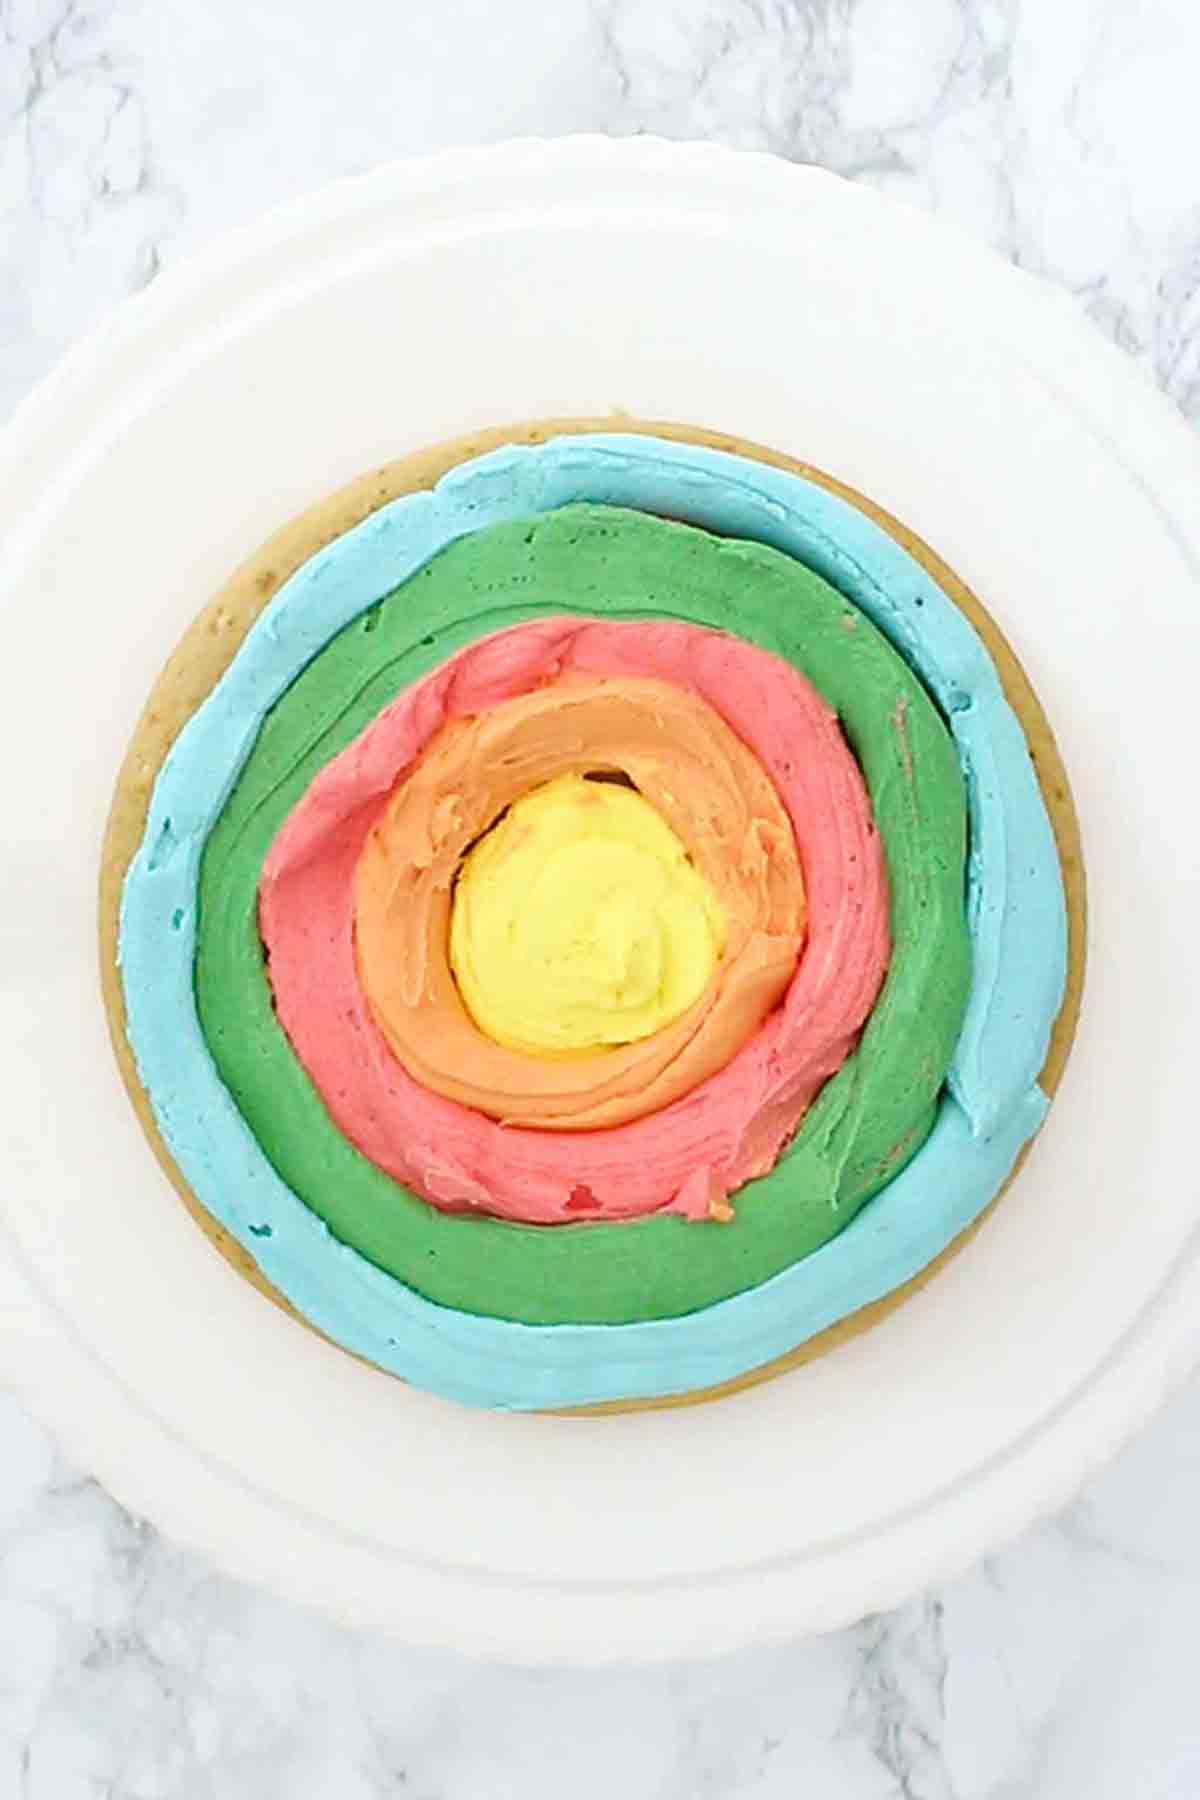 Cake On A Cakestand With Rainbow Frosting On It